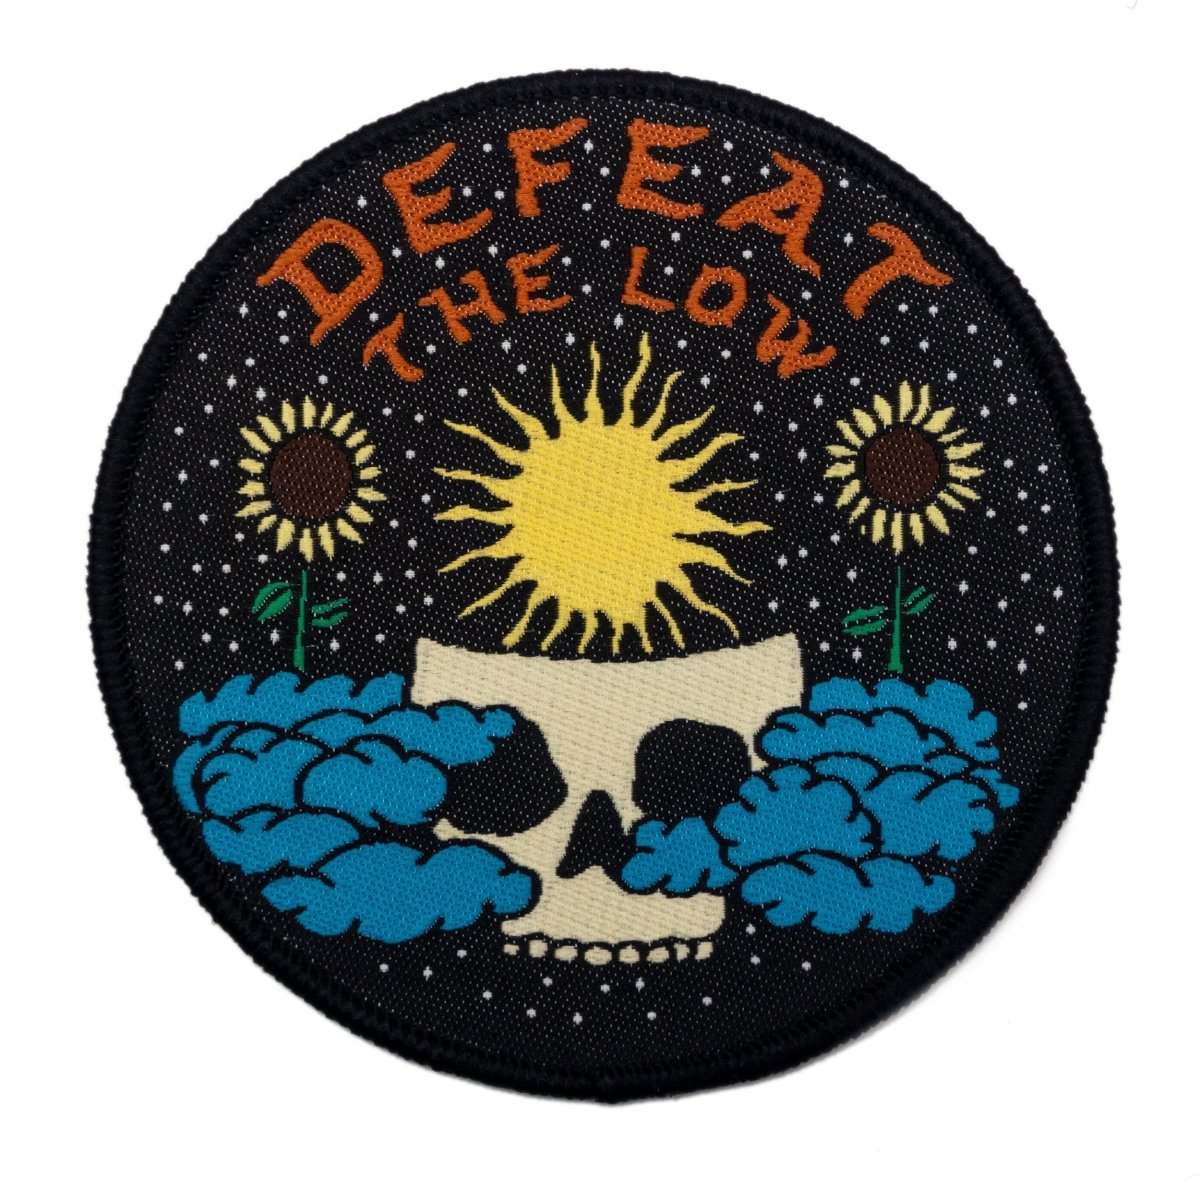 Defeat The Low Patch - Patch - Pretty Bad Co.